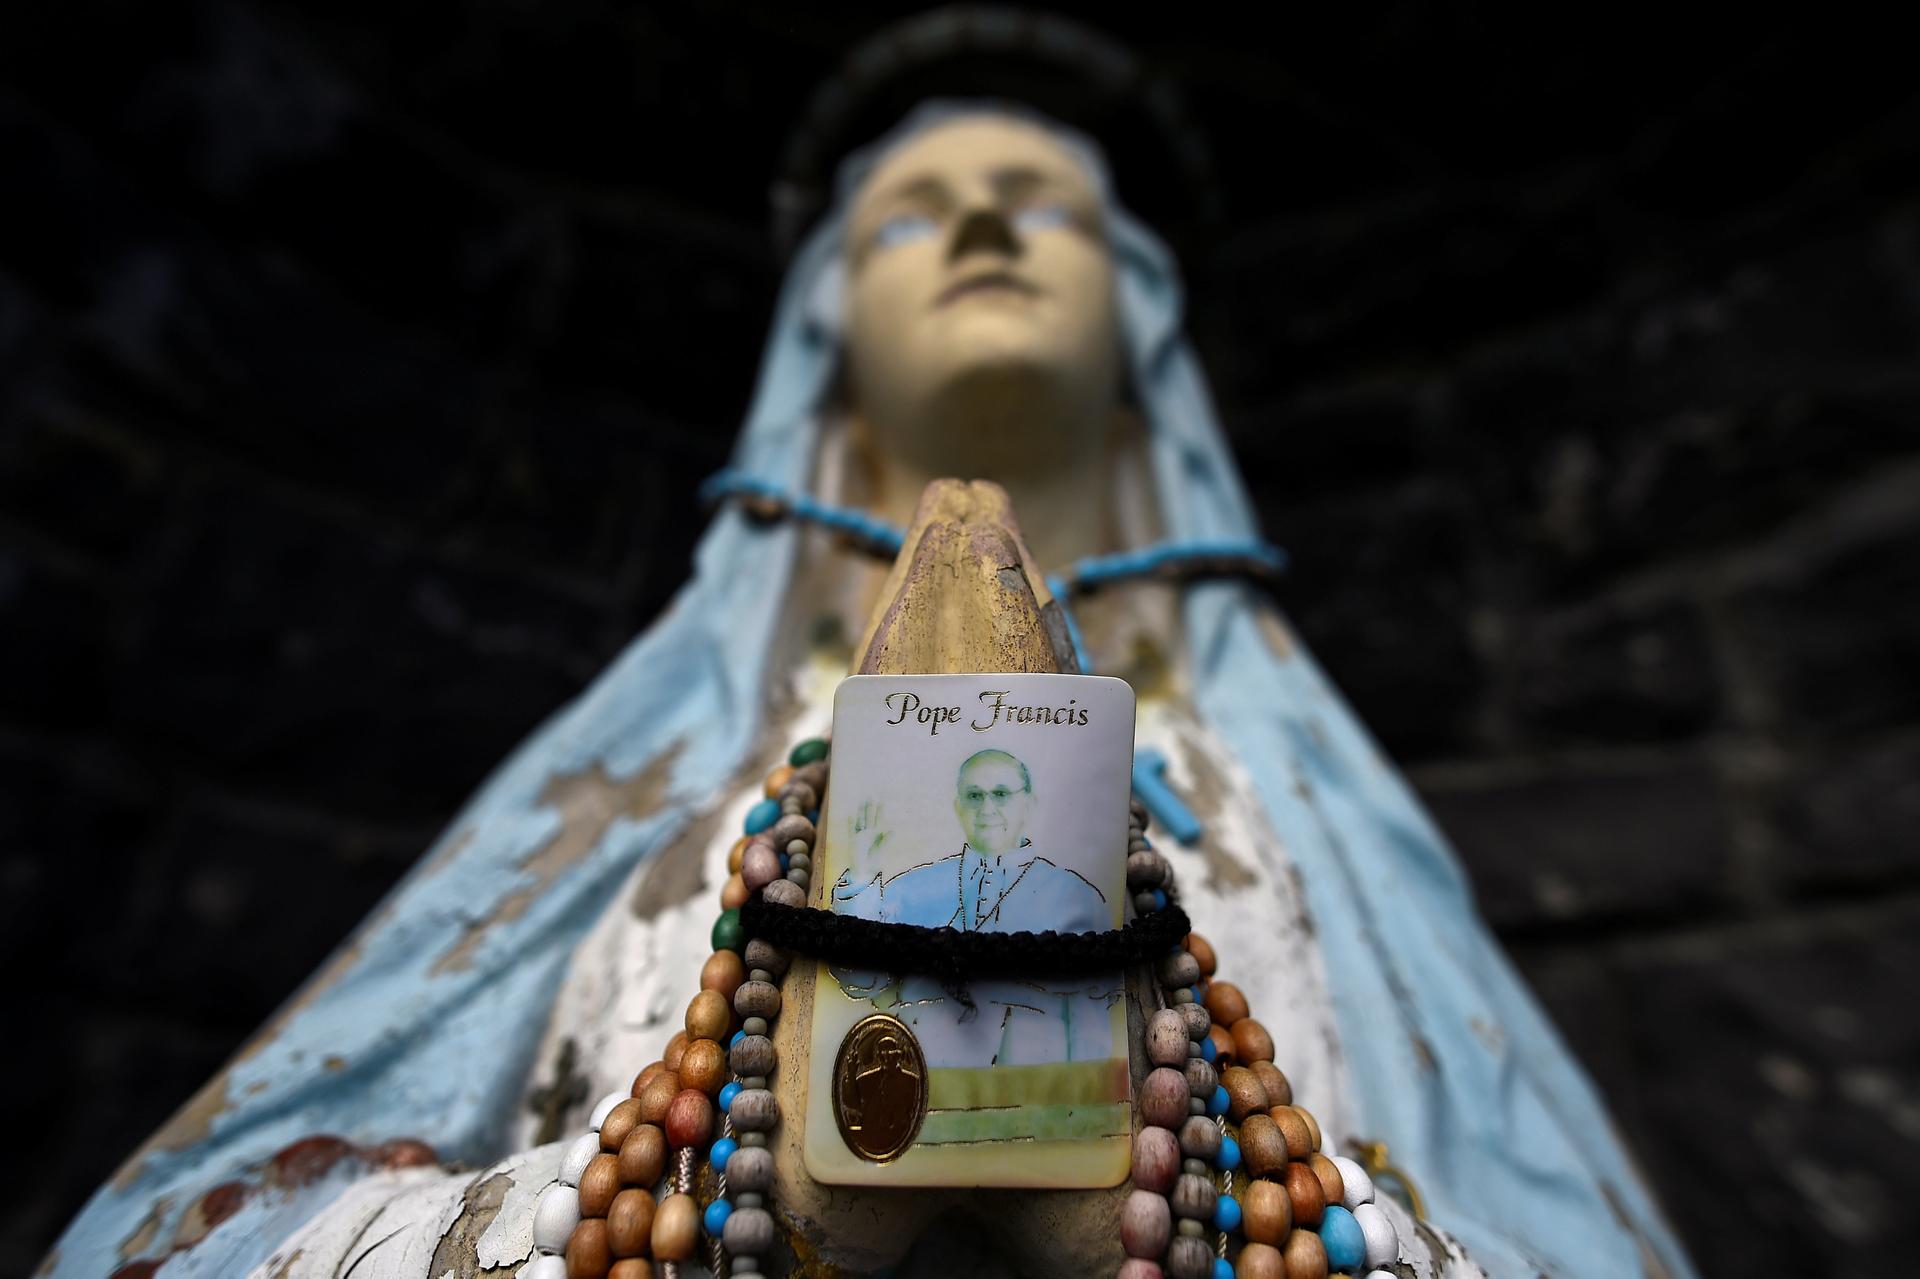 A religious grotto featuring a statue of the Virgin Mary holding a Pope Francis prayer card